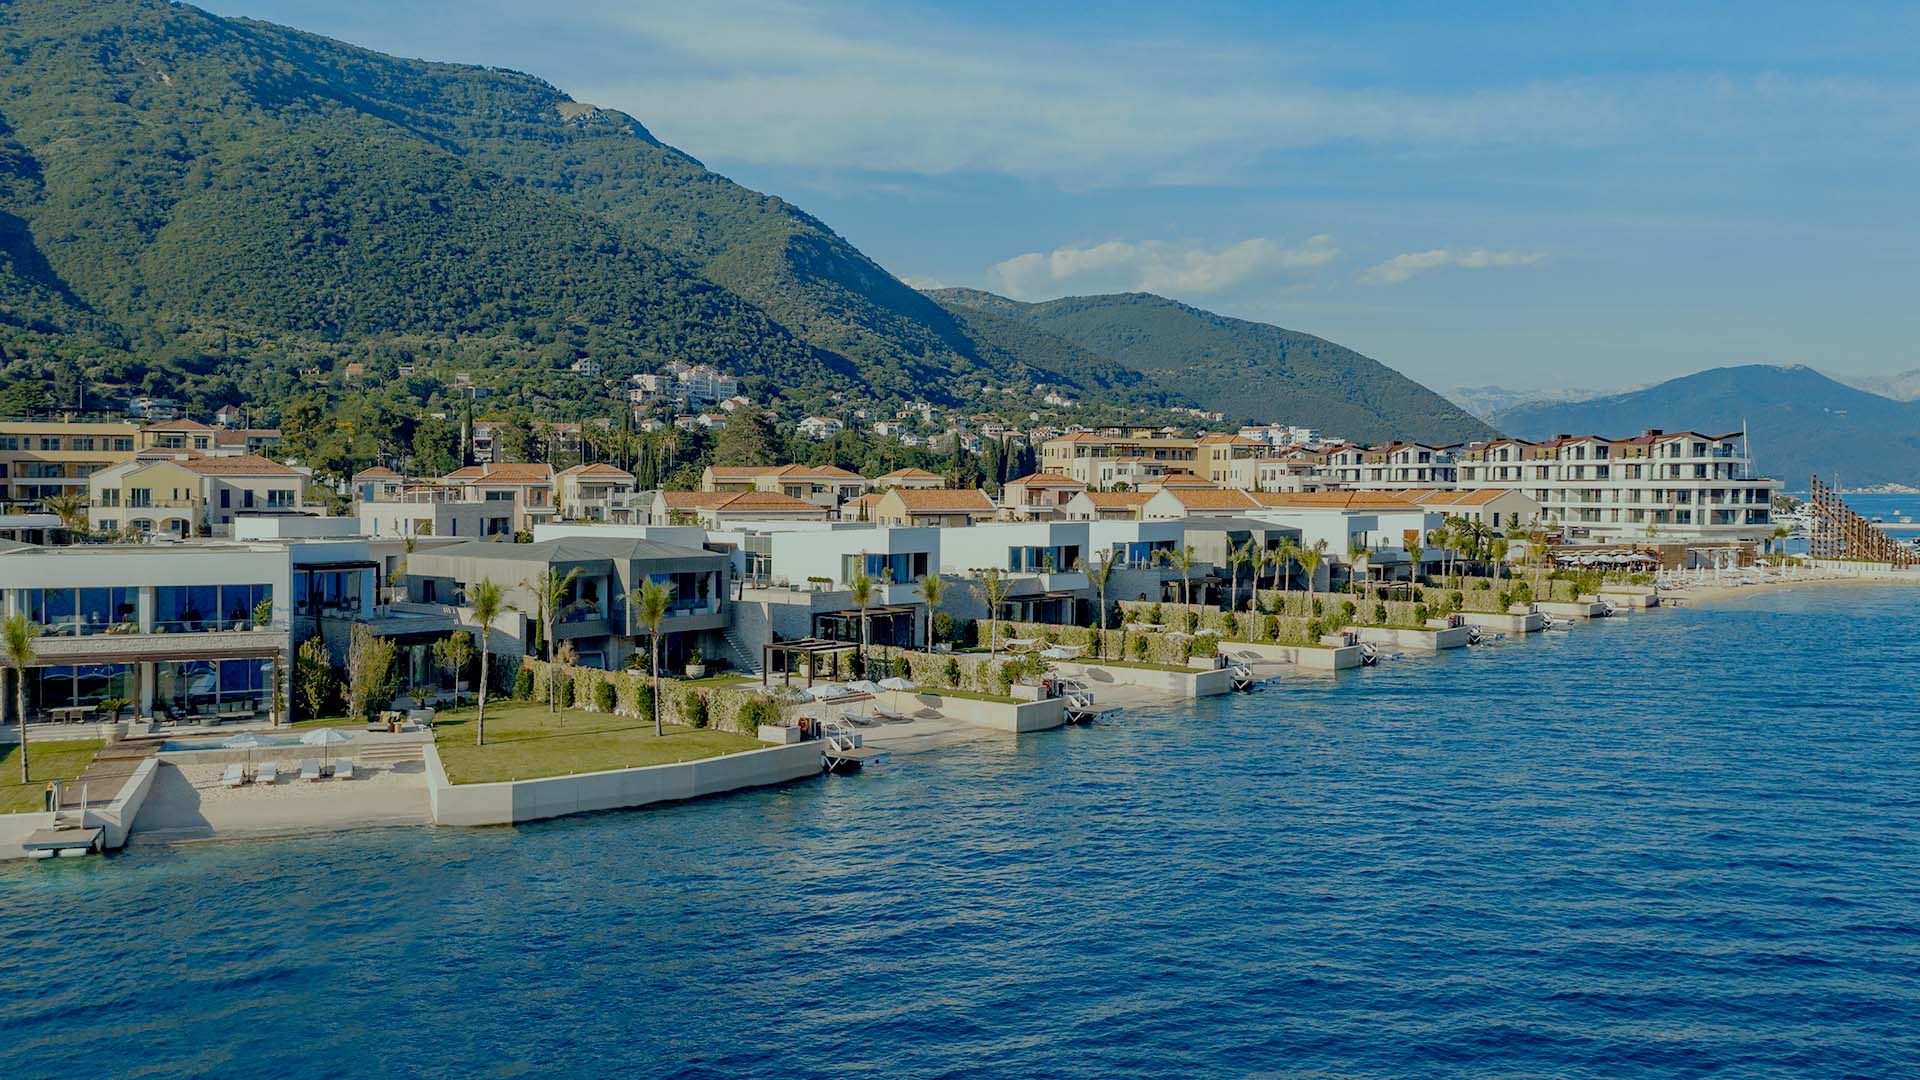 One&Only private homes overlooking Boka Bay at One&Only Portonovi, Montenegro.